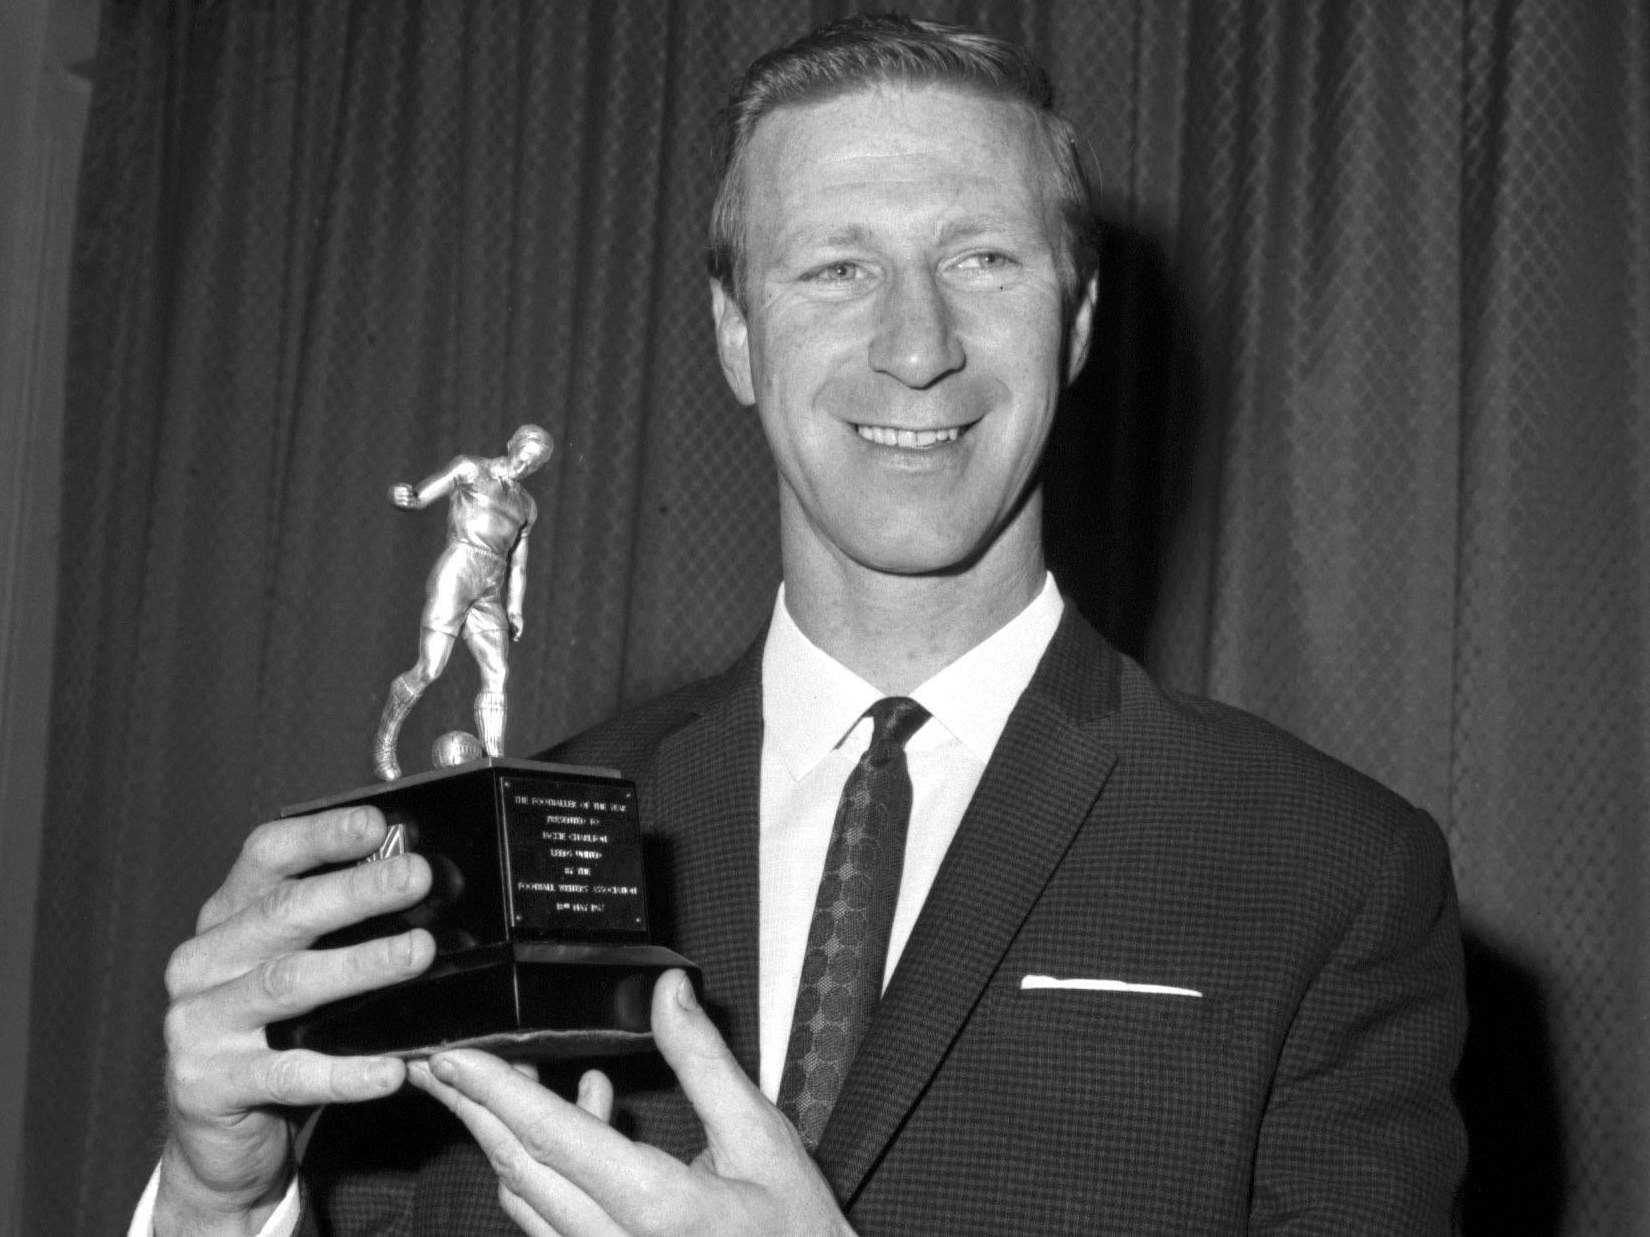 Charlton was named Footballer of the Year by the Football Writers’ Association in 1967